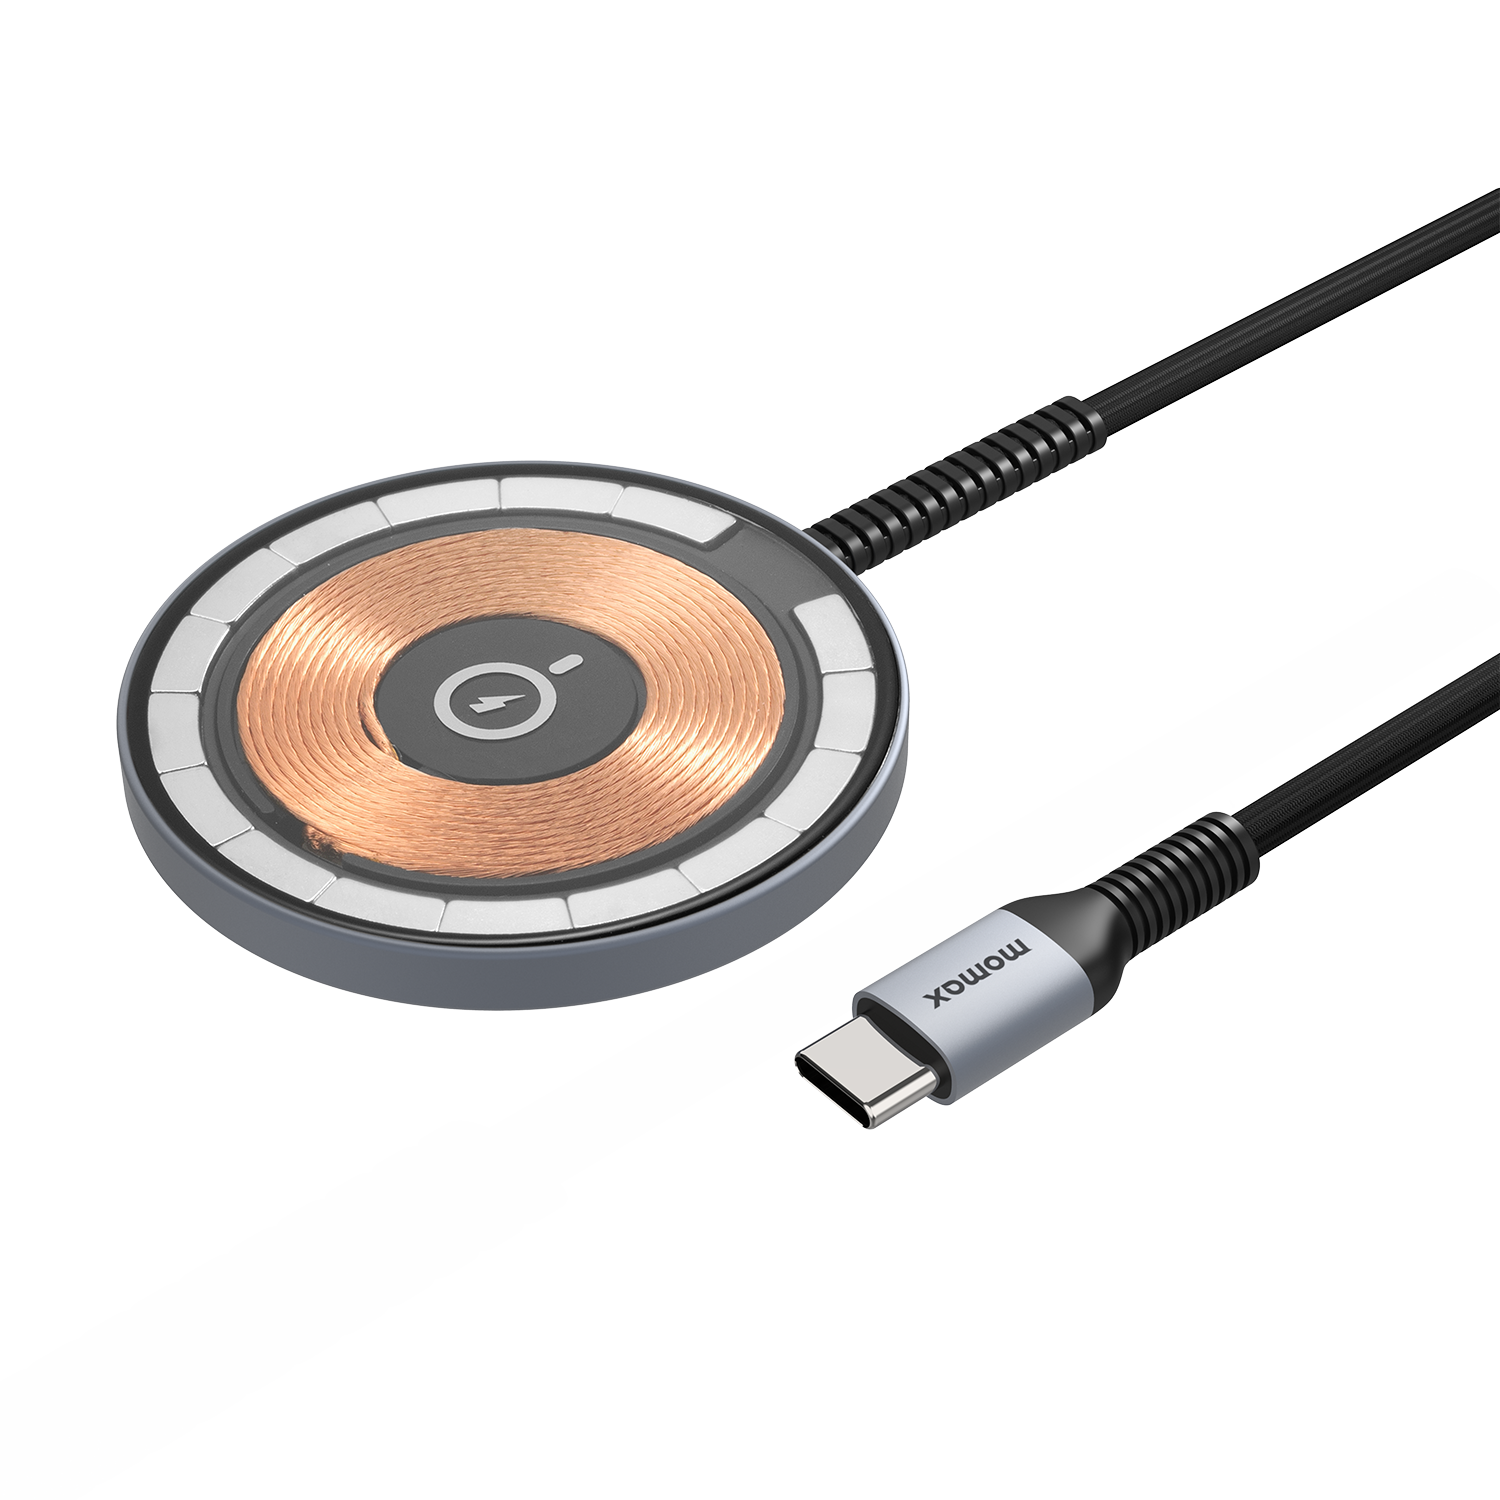 Q.Mag 2 Magnetic Wireless Charger 15W